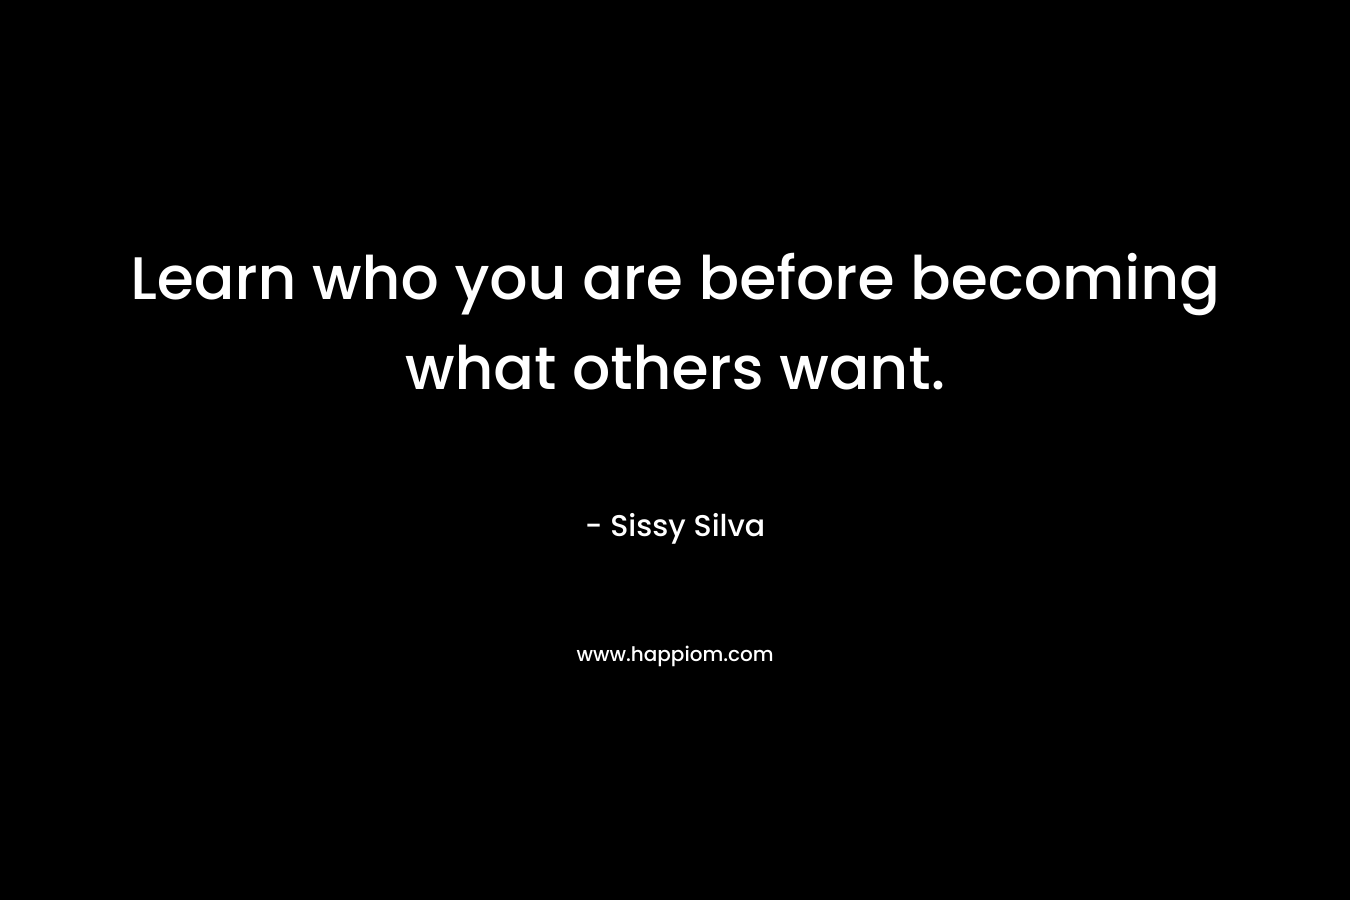 Learn who you are before becoming what others want.